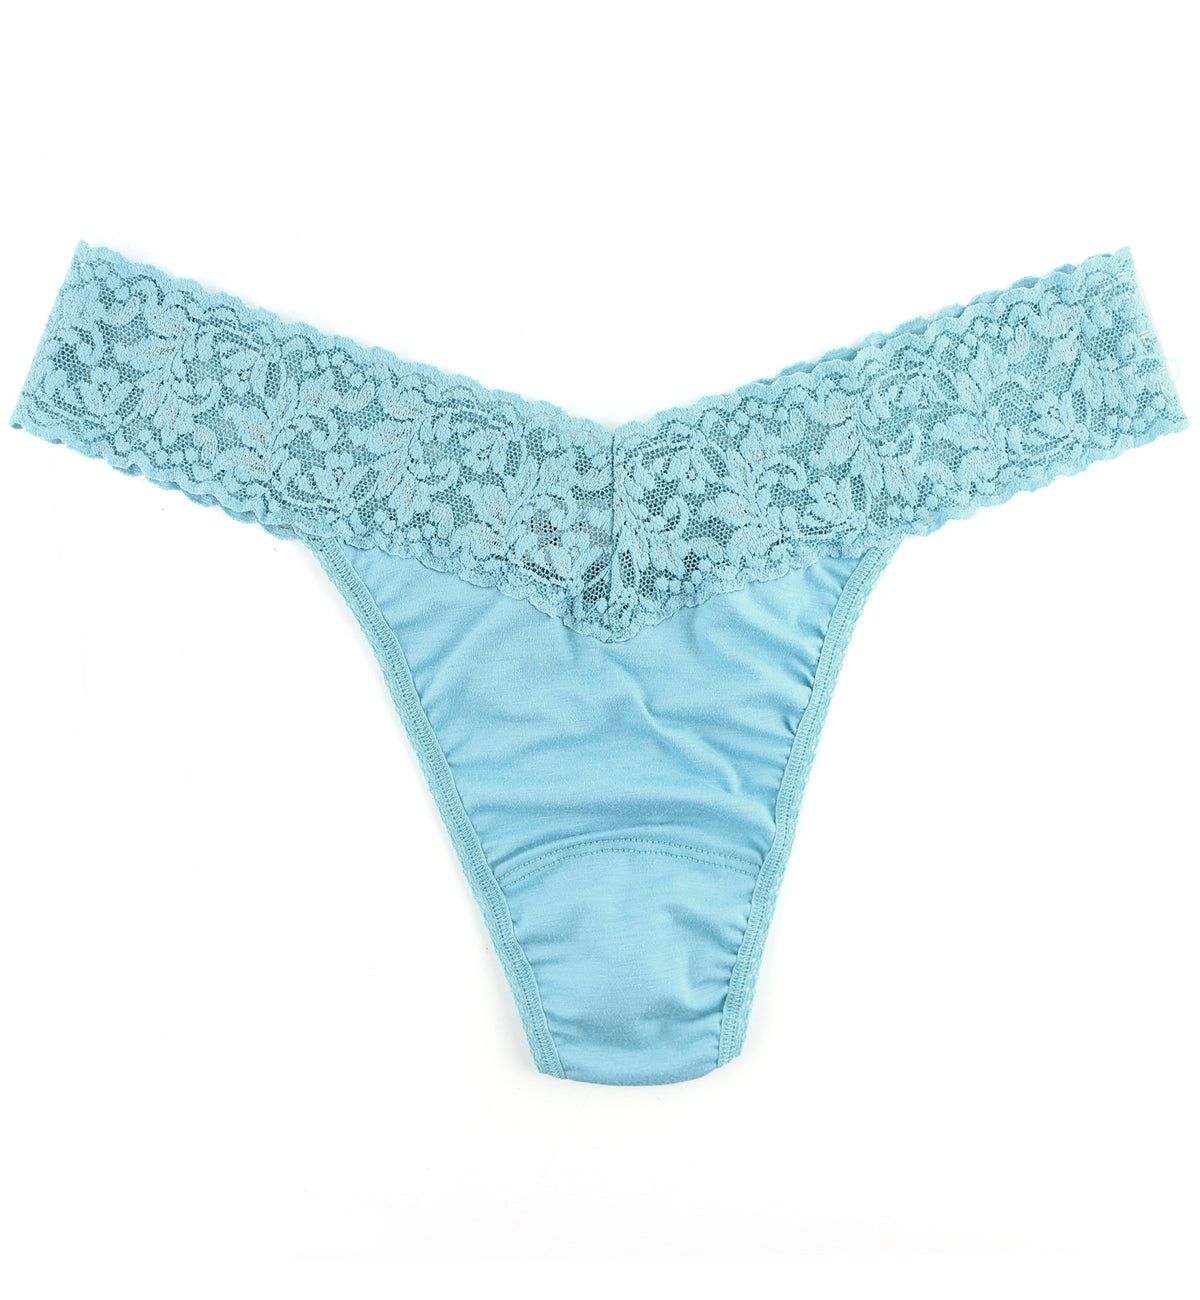 Hanky Panky Original Rise Organic Cotton Thong with Lace (891801),Mineral Blue - Mineral Blue,One Size